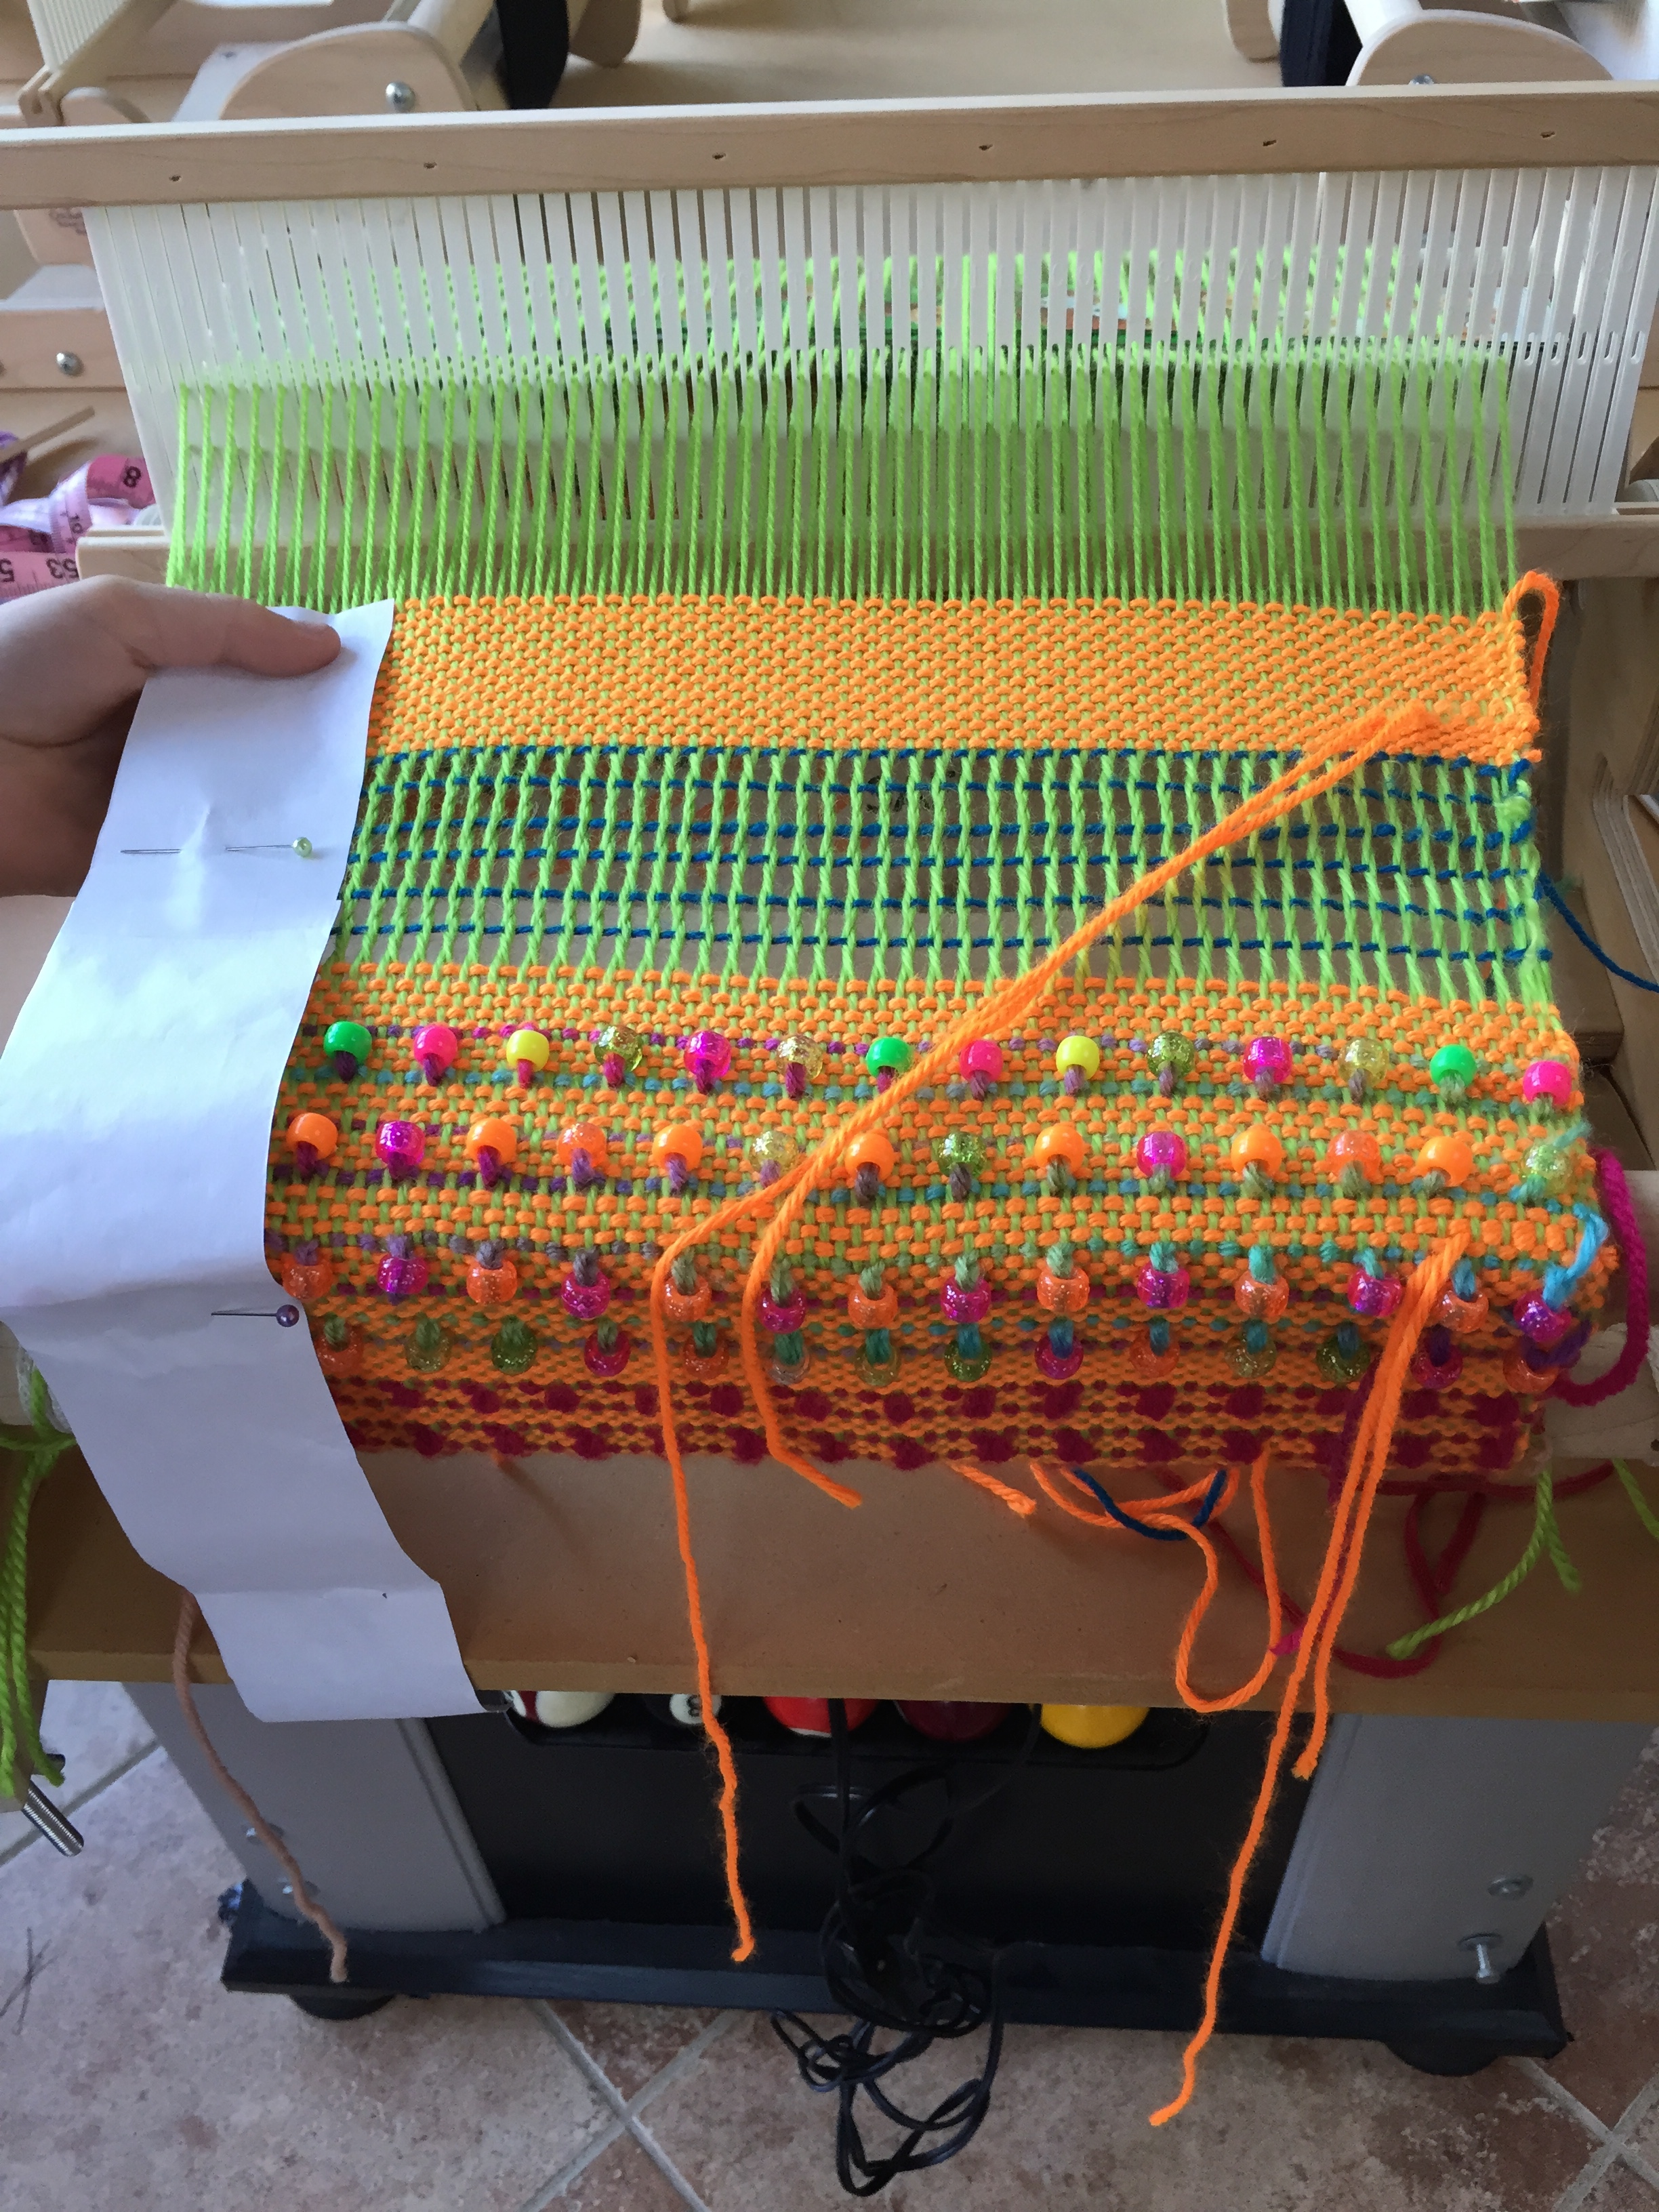 Finishing the weaving on part of a tote bag.